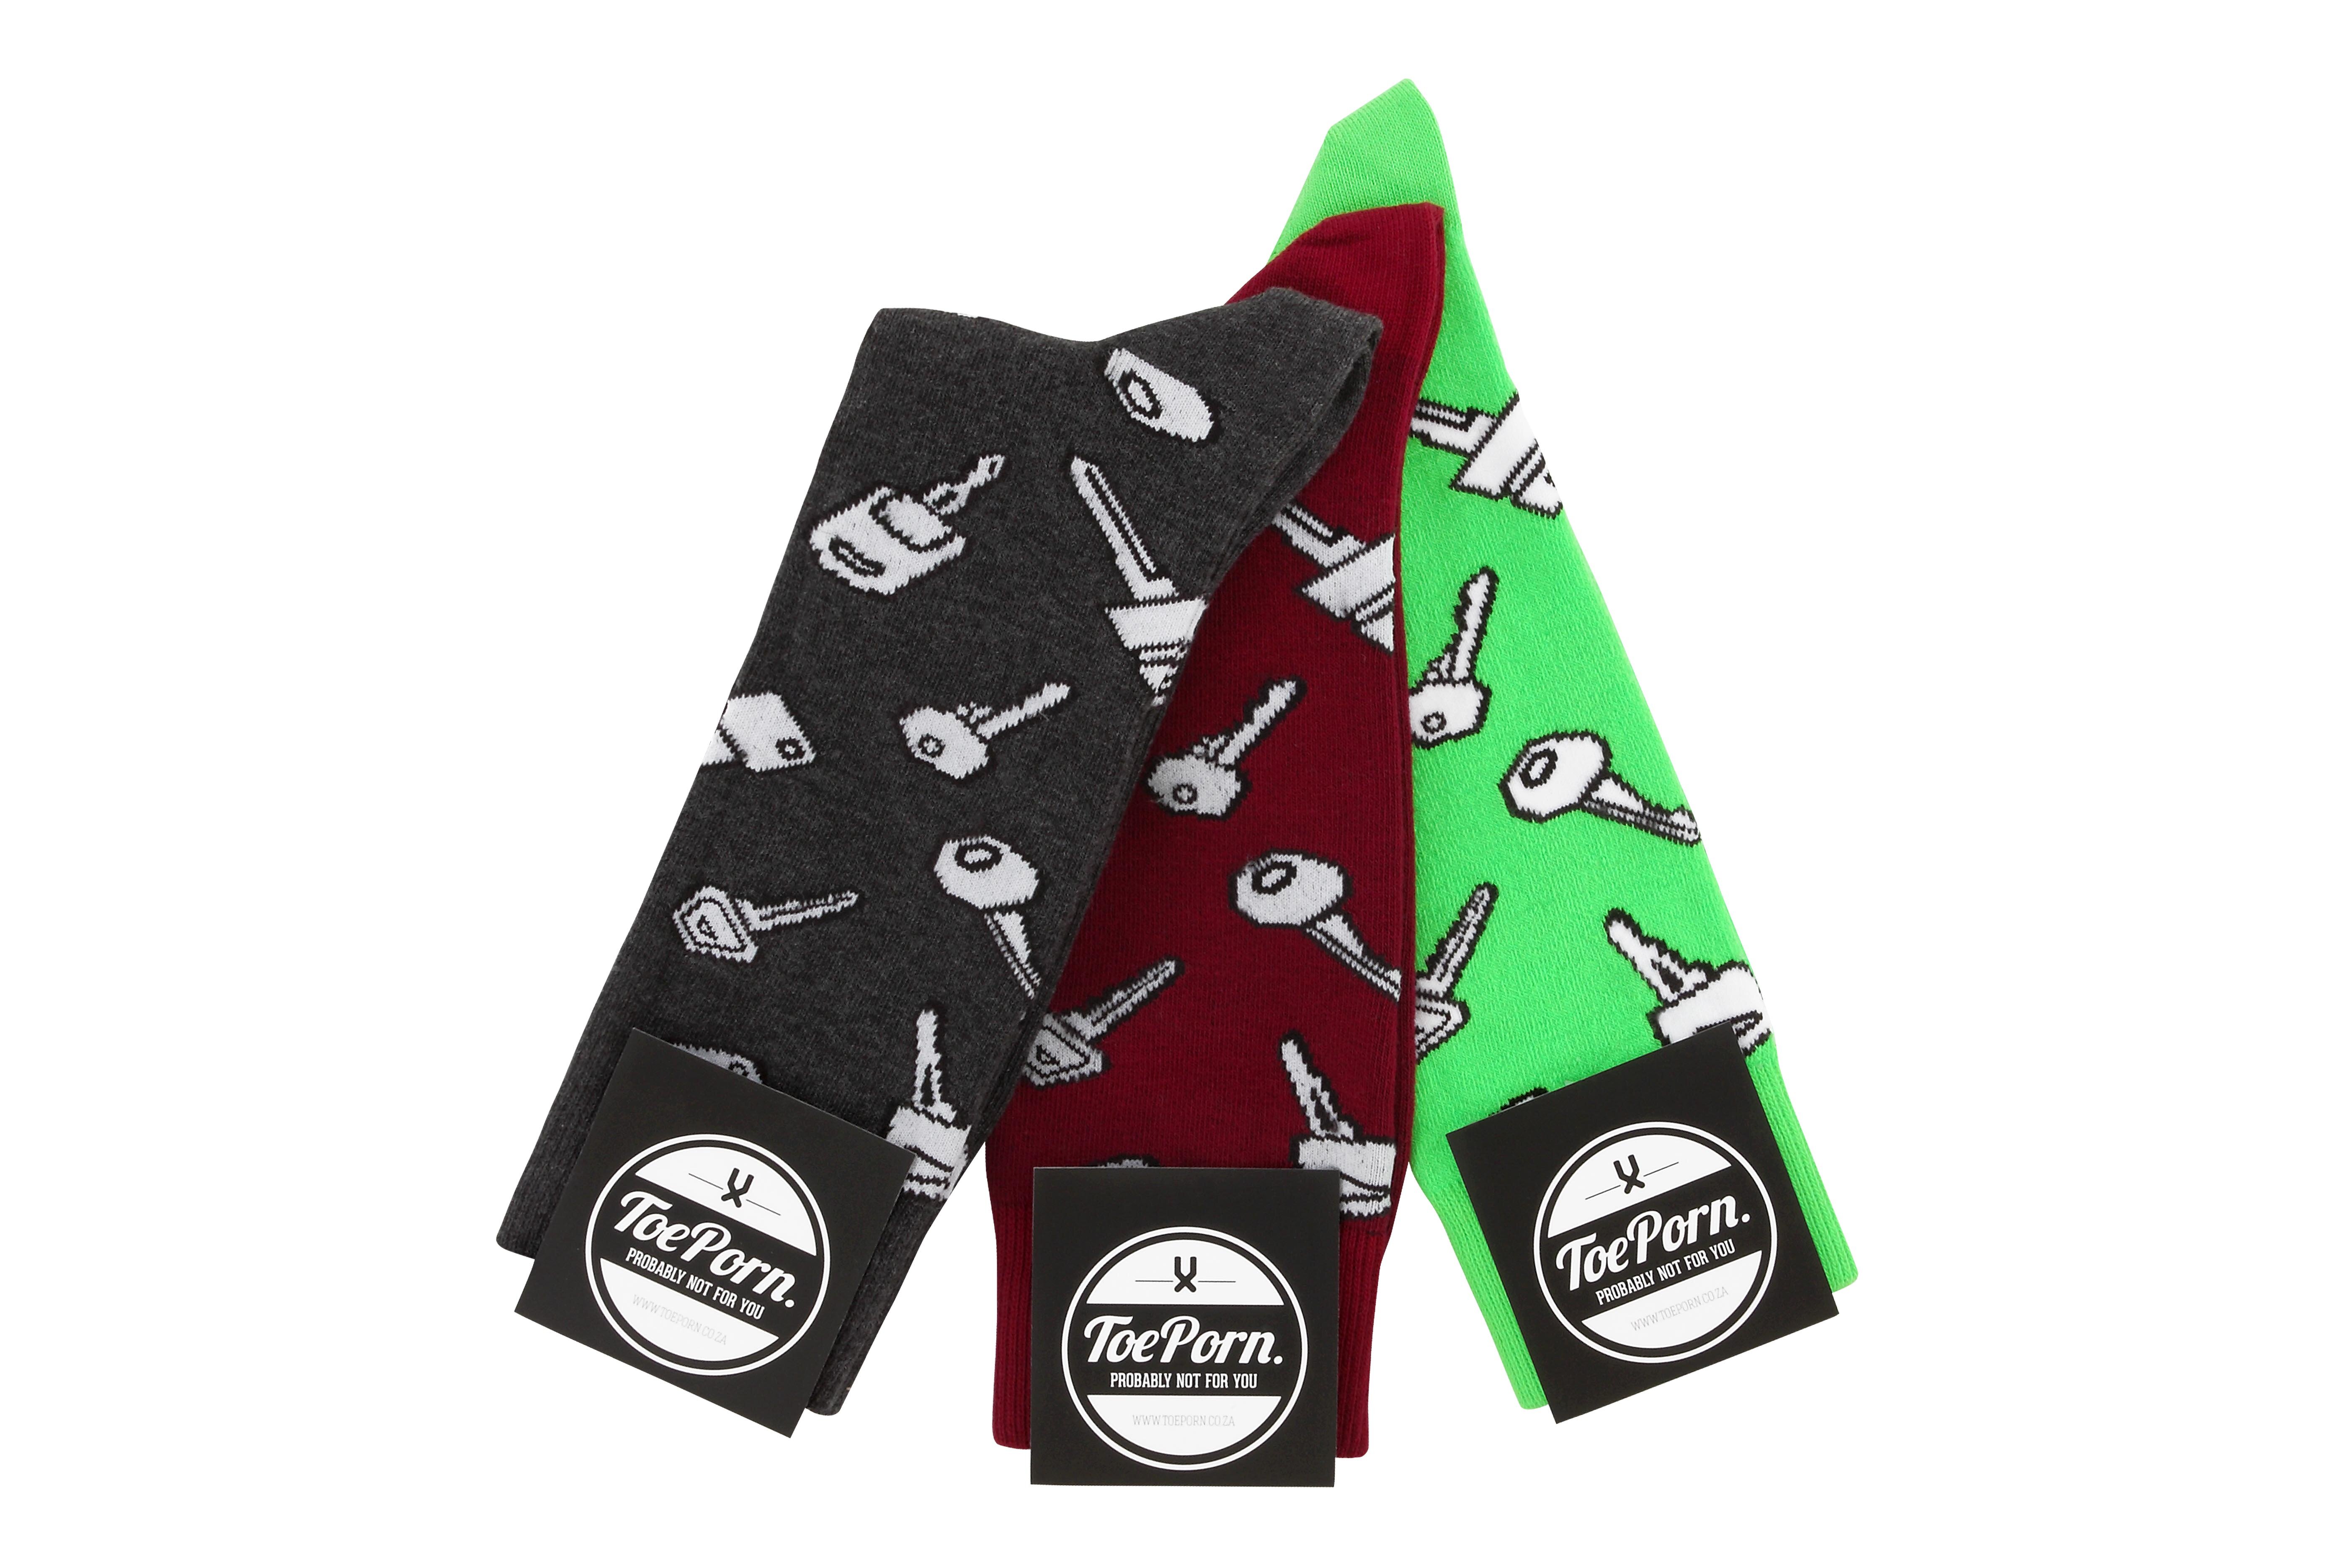 Kayden Key ToePorn socks available in Charcoal, Maroon and Neon Green, R90 each